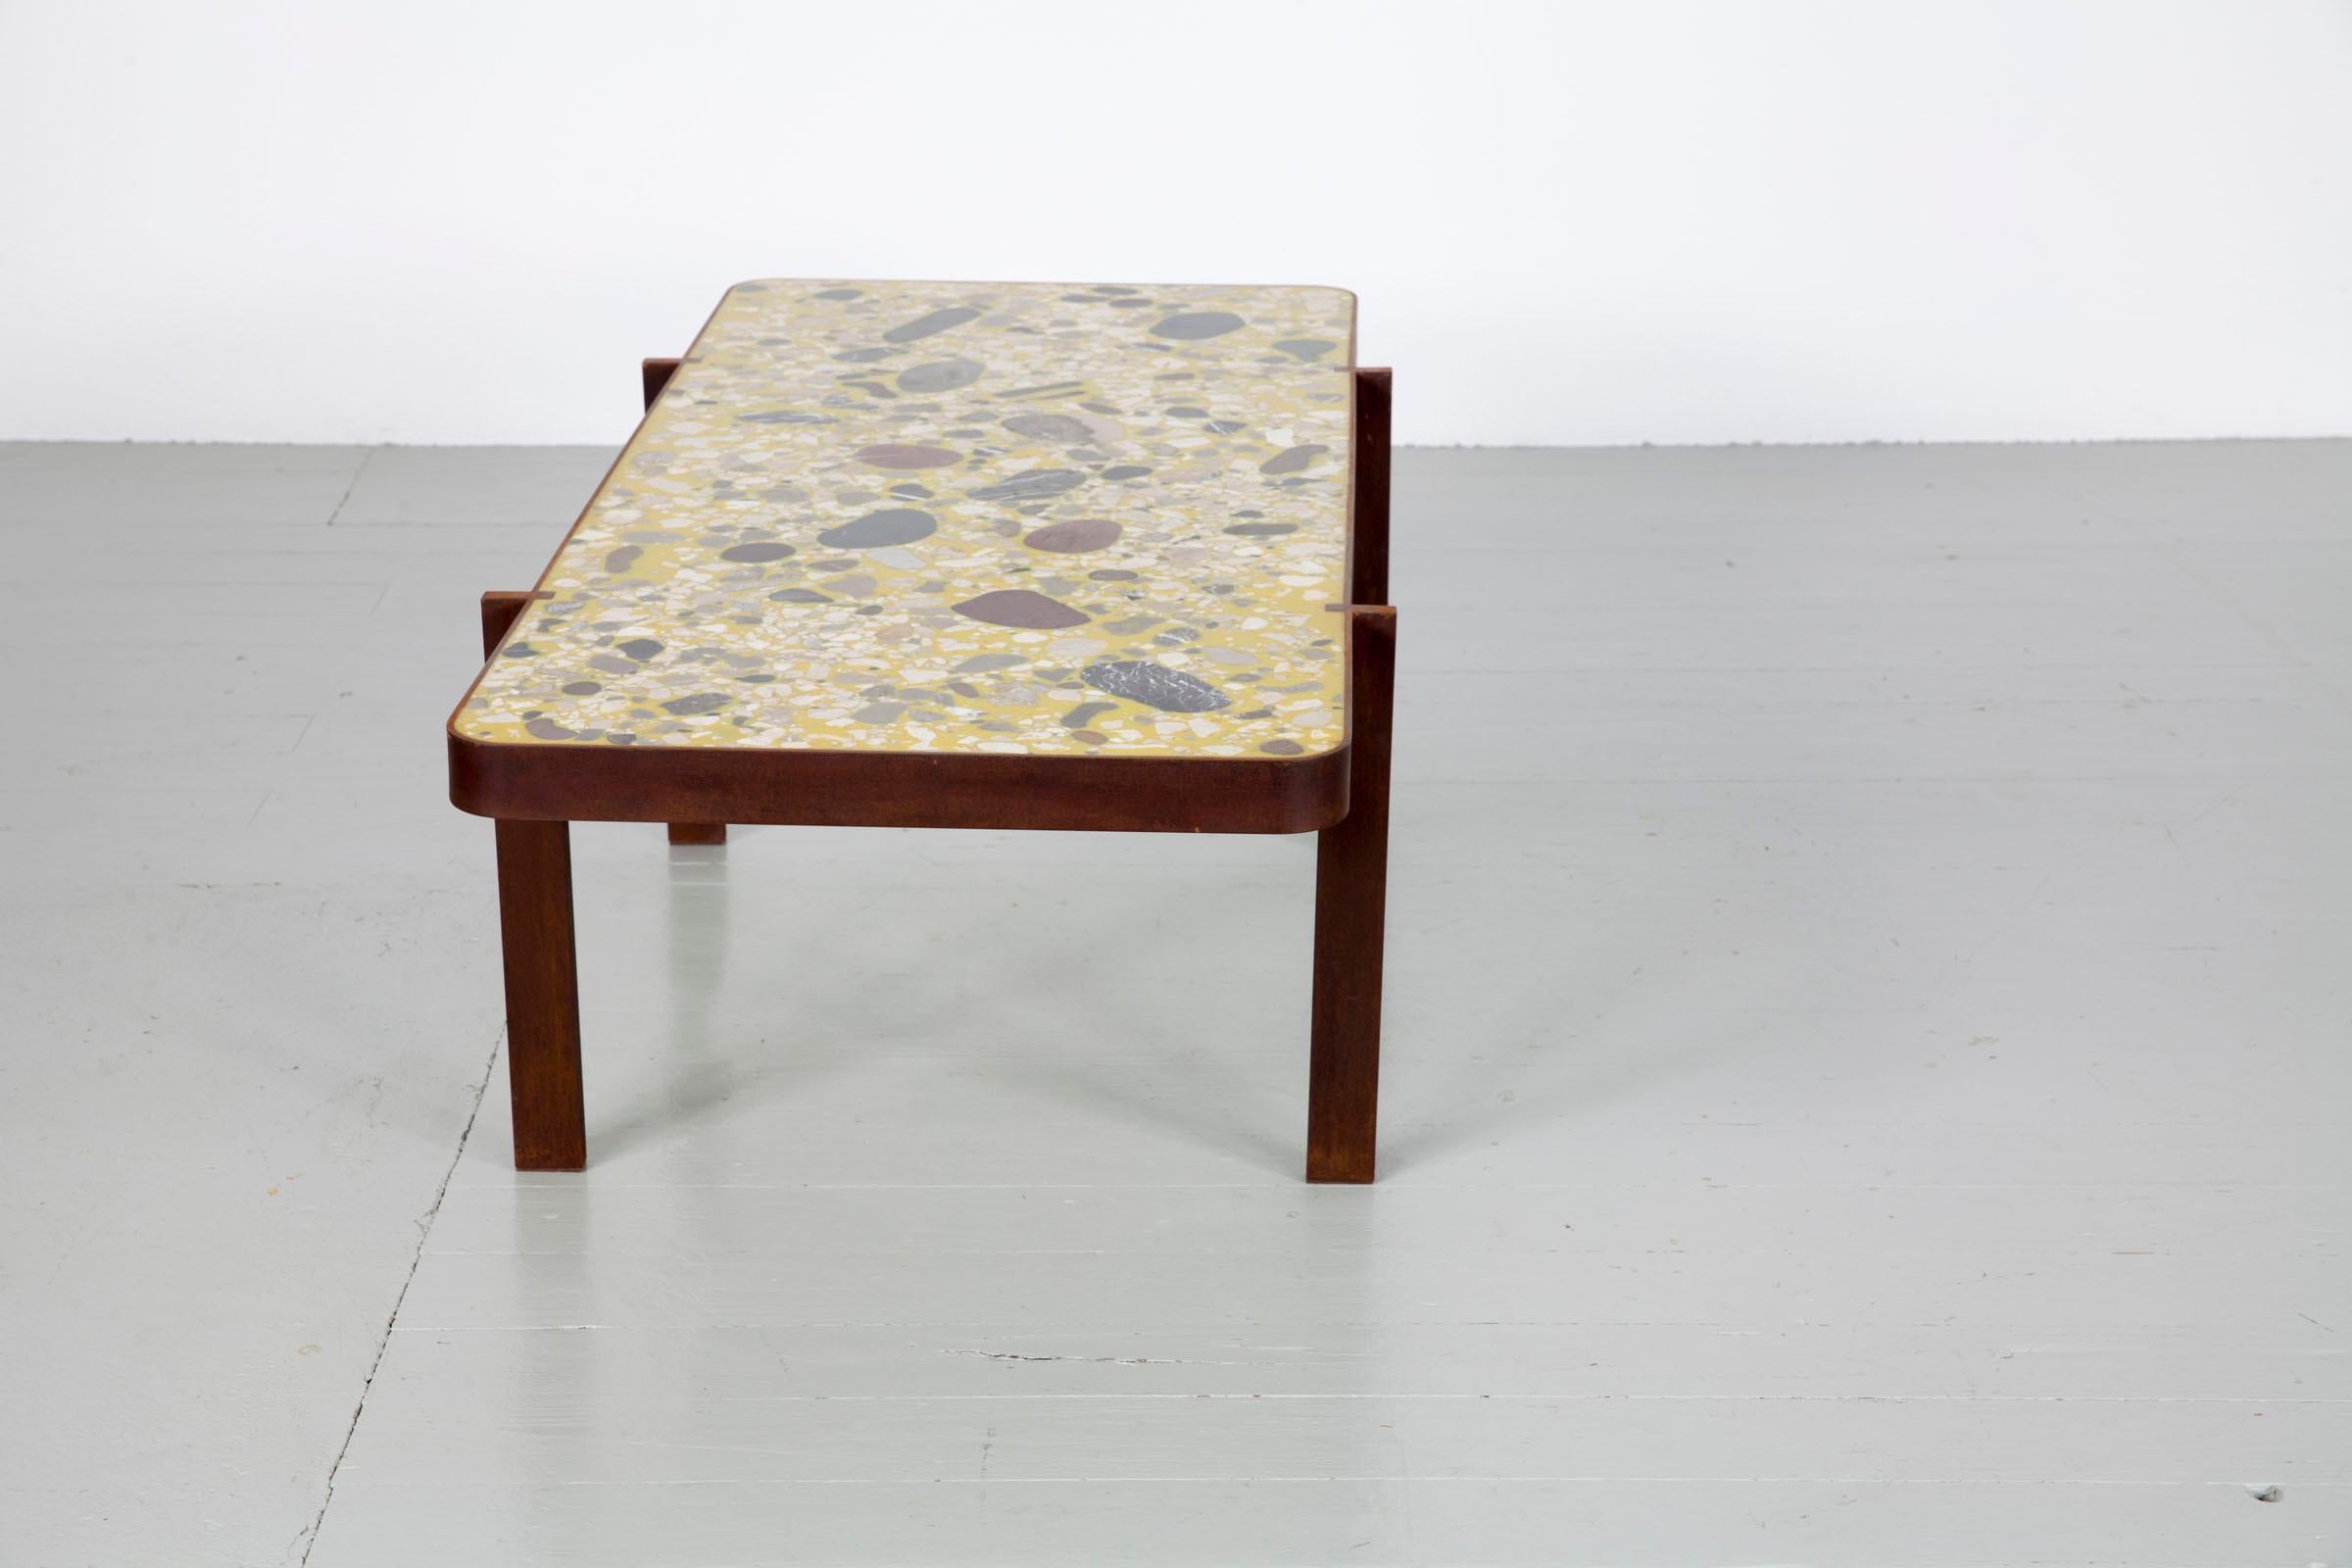 Felix Muhrhofer Contemporary Terrazzo Table with Corroded Steel Construction For Sale 7